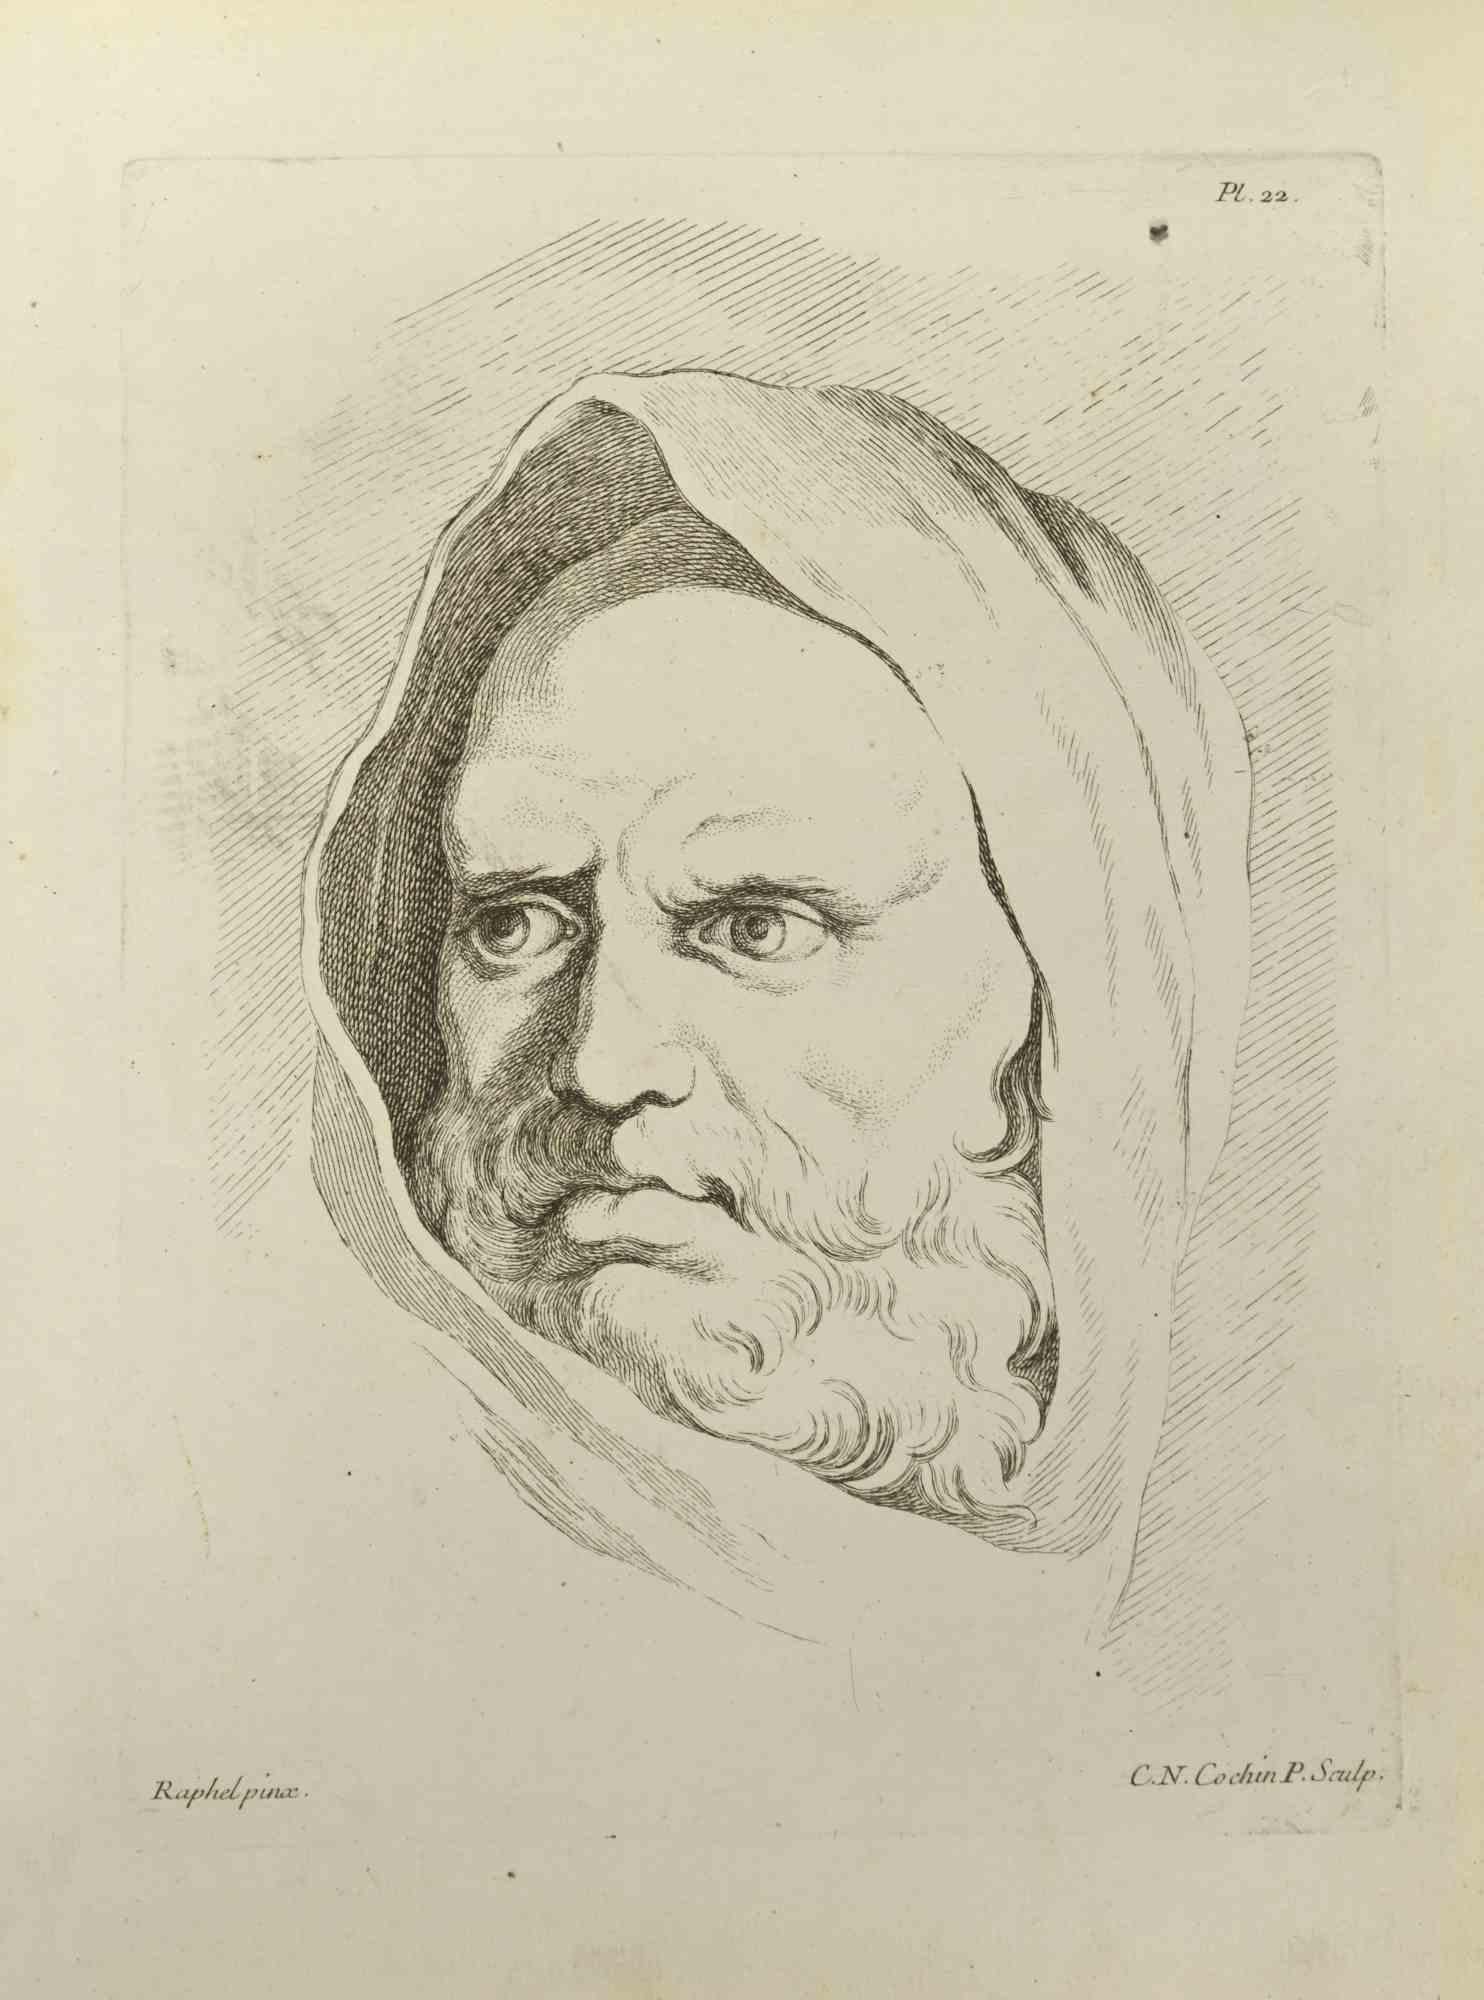 Portrait after Raphael is an etching realized by Nicholas Cochin in 1755.

Signed in the plate.

Good conditions with foxing.

The artwork is depicted through confident strokes.

The etching was realized for the anatomy study “JOMBERT,